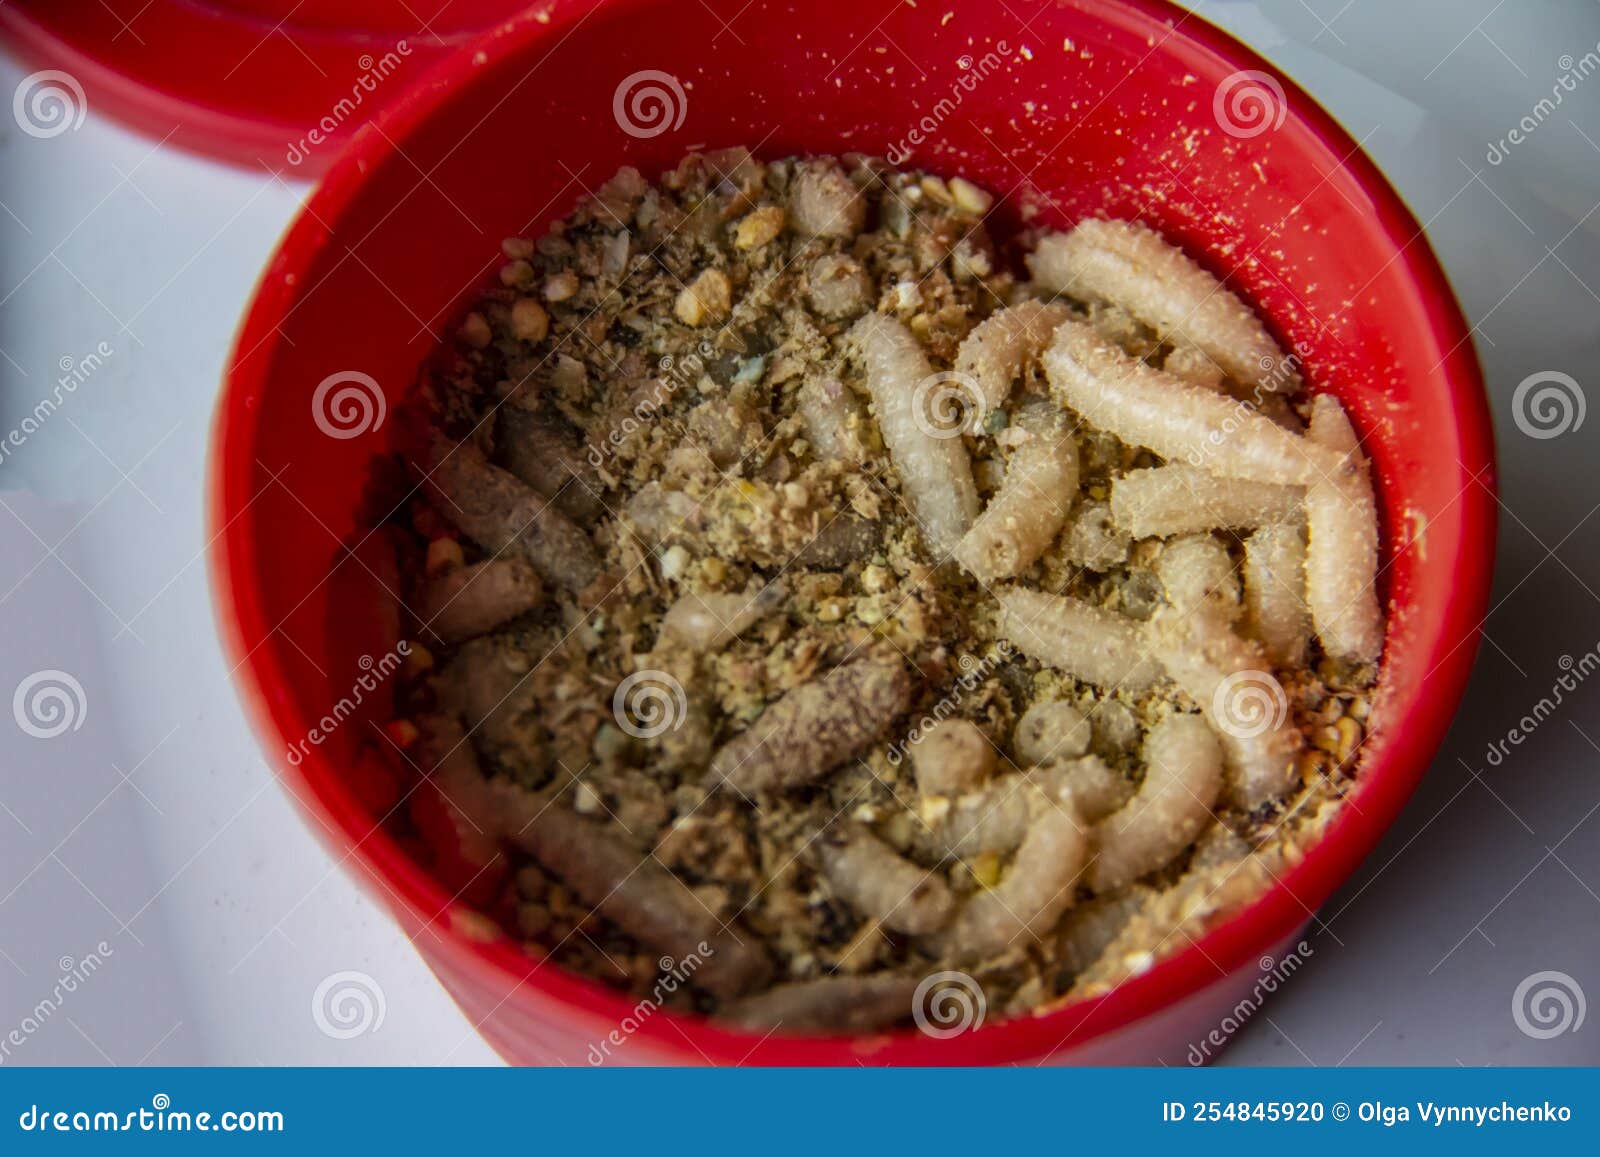 Live Fly Larvae in the Red Plastic Plate As Bait for Catching Fish. the  Maggots for Fishing Against Background Stock Photo - Image of biology,  lure: 254845920